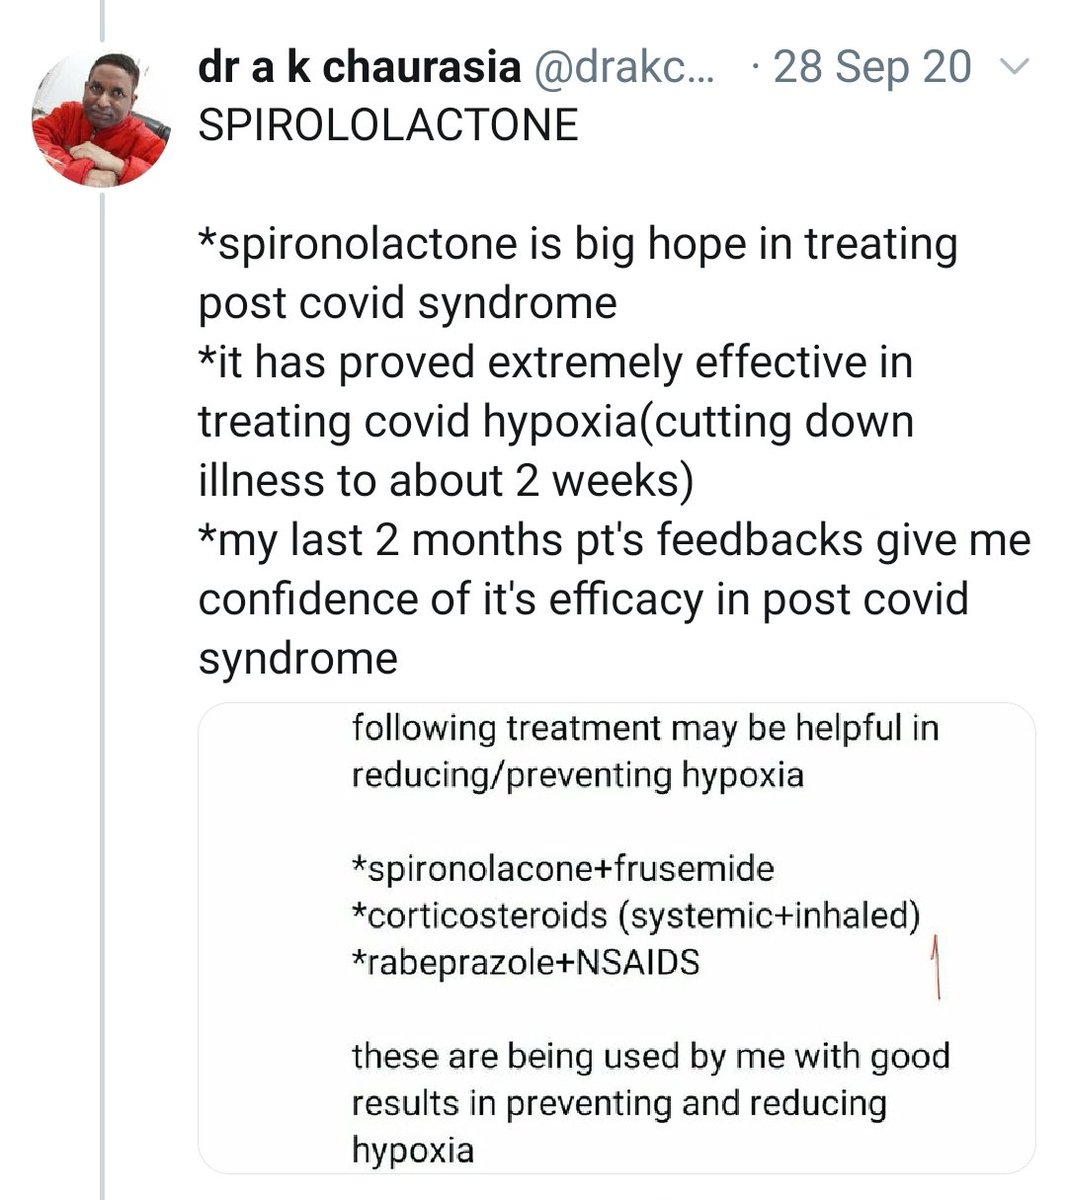 "SPIROLOLACTONE*spironolactone is big hope in treating post covid syndrome*it has proved extremely effective in treating covid hypoxia(cutting down illness to about 2 weeks)*my last 2 months pt's feedbacks give me confidence of it's efficacy in post covid syndrome"28 sept 20